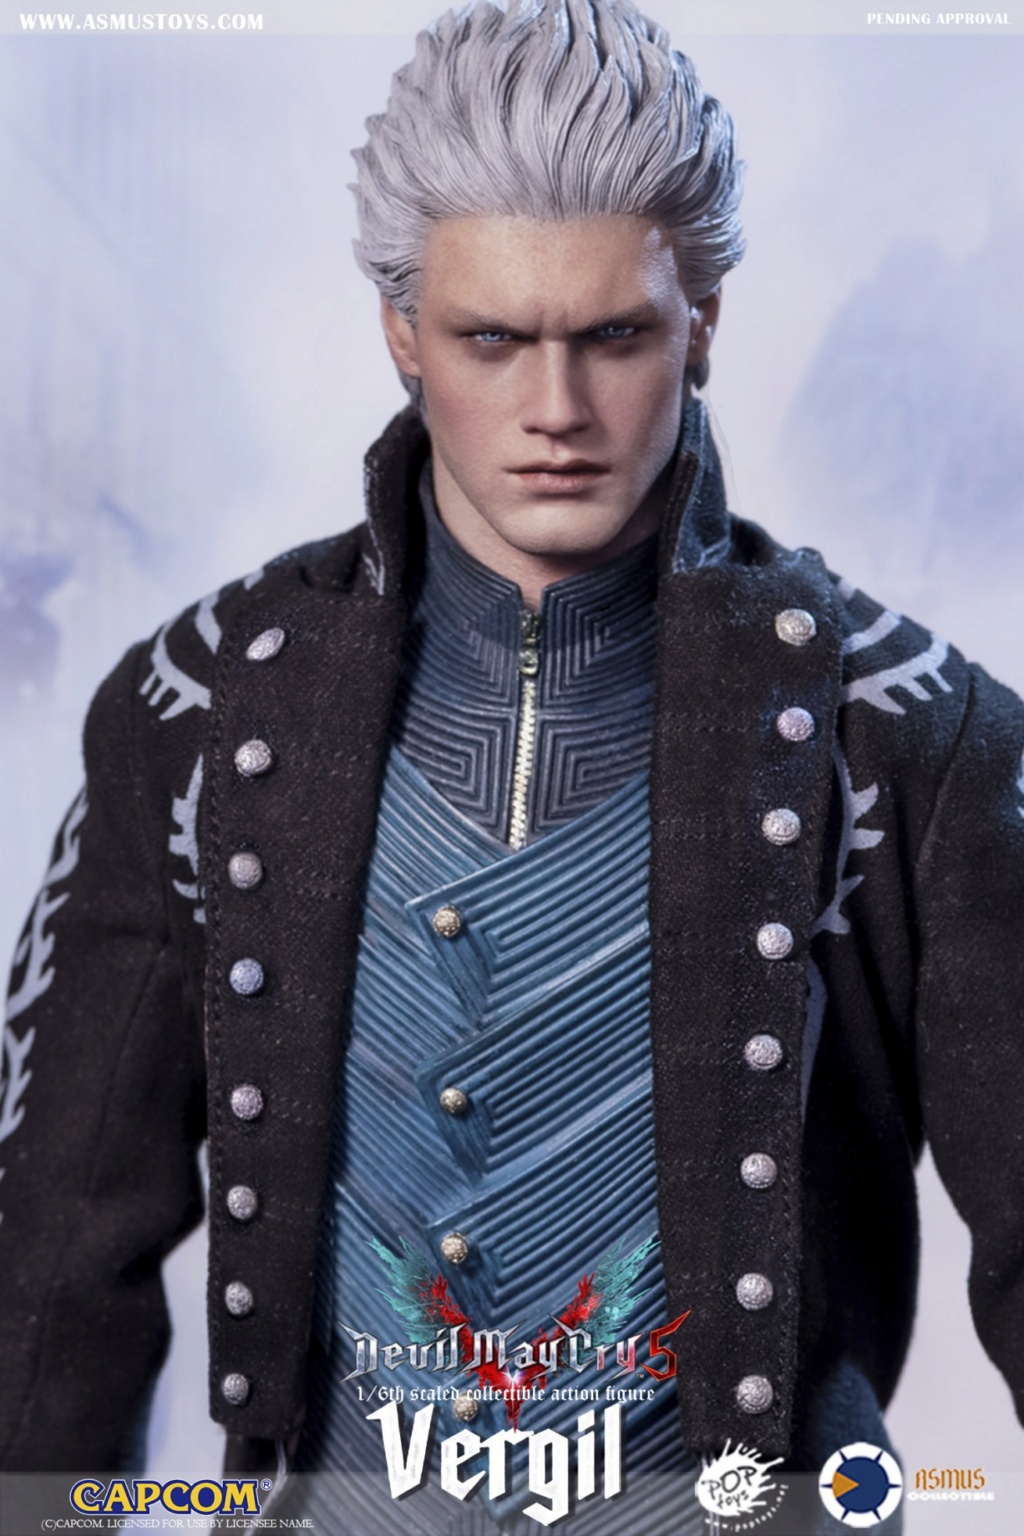 Fantasy - NEW PRODUCT: Asmus Toys New Products: 1/6 "Devil Hunter/Devil May Cry 5" series-Virgil Standard & Deluxe Edition 180d2210